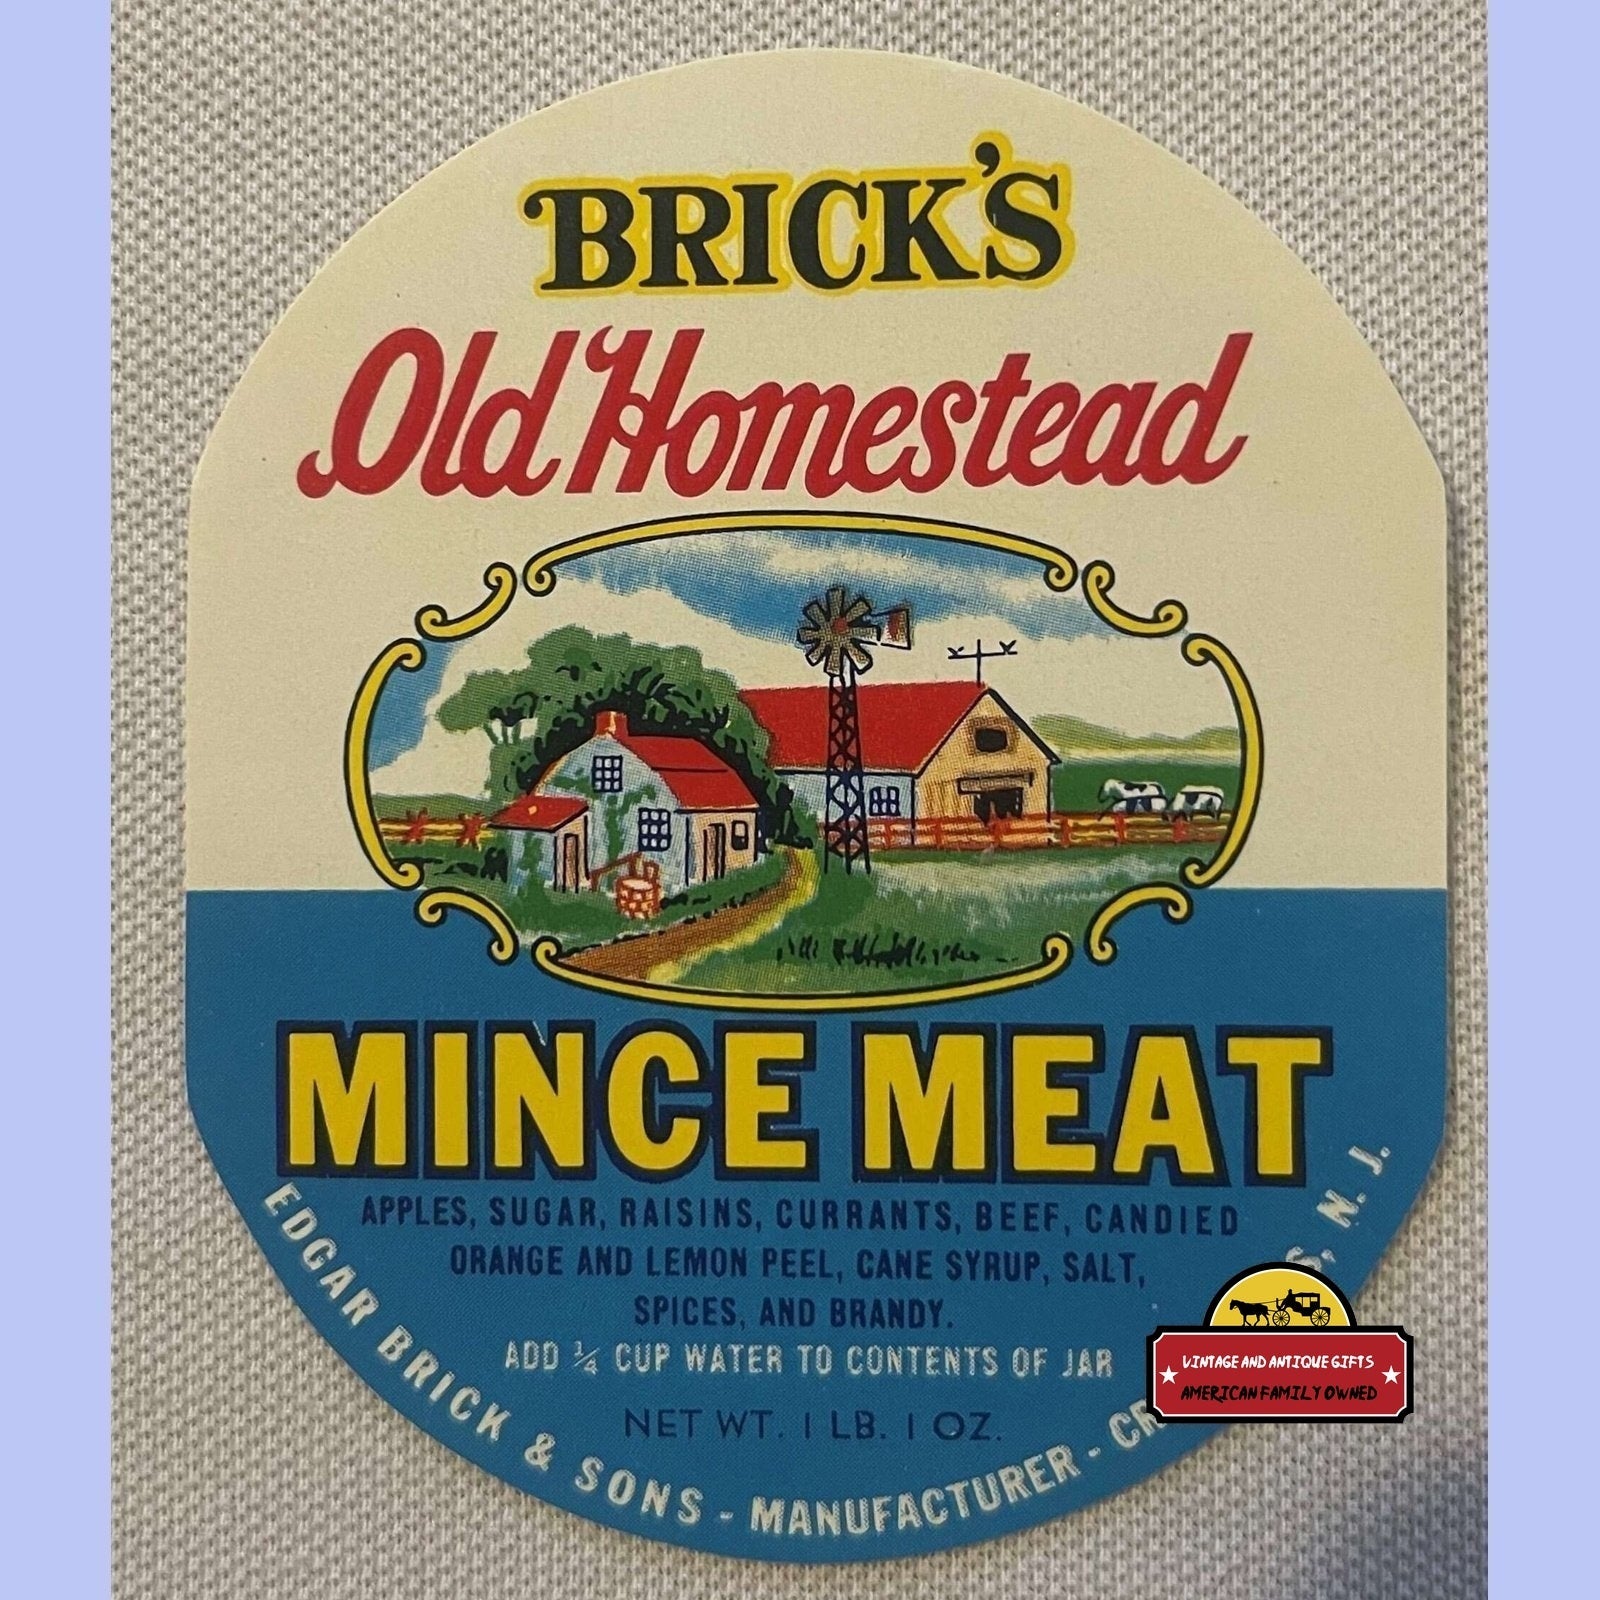 Rare Antique Vintage Old Homestead Mince Meat Label 1910s - 1930s - Advertisements - Food And Home Misc. Labels.